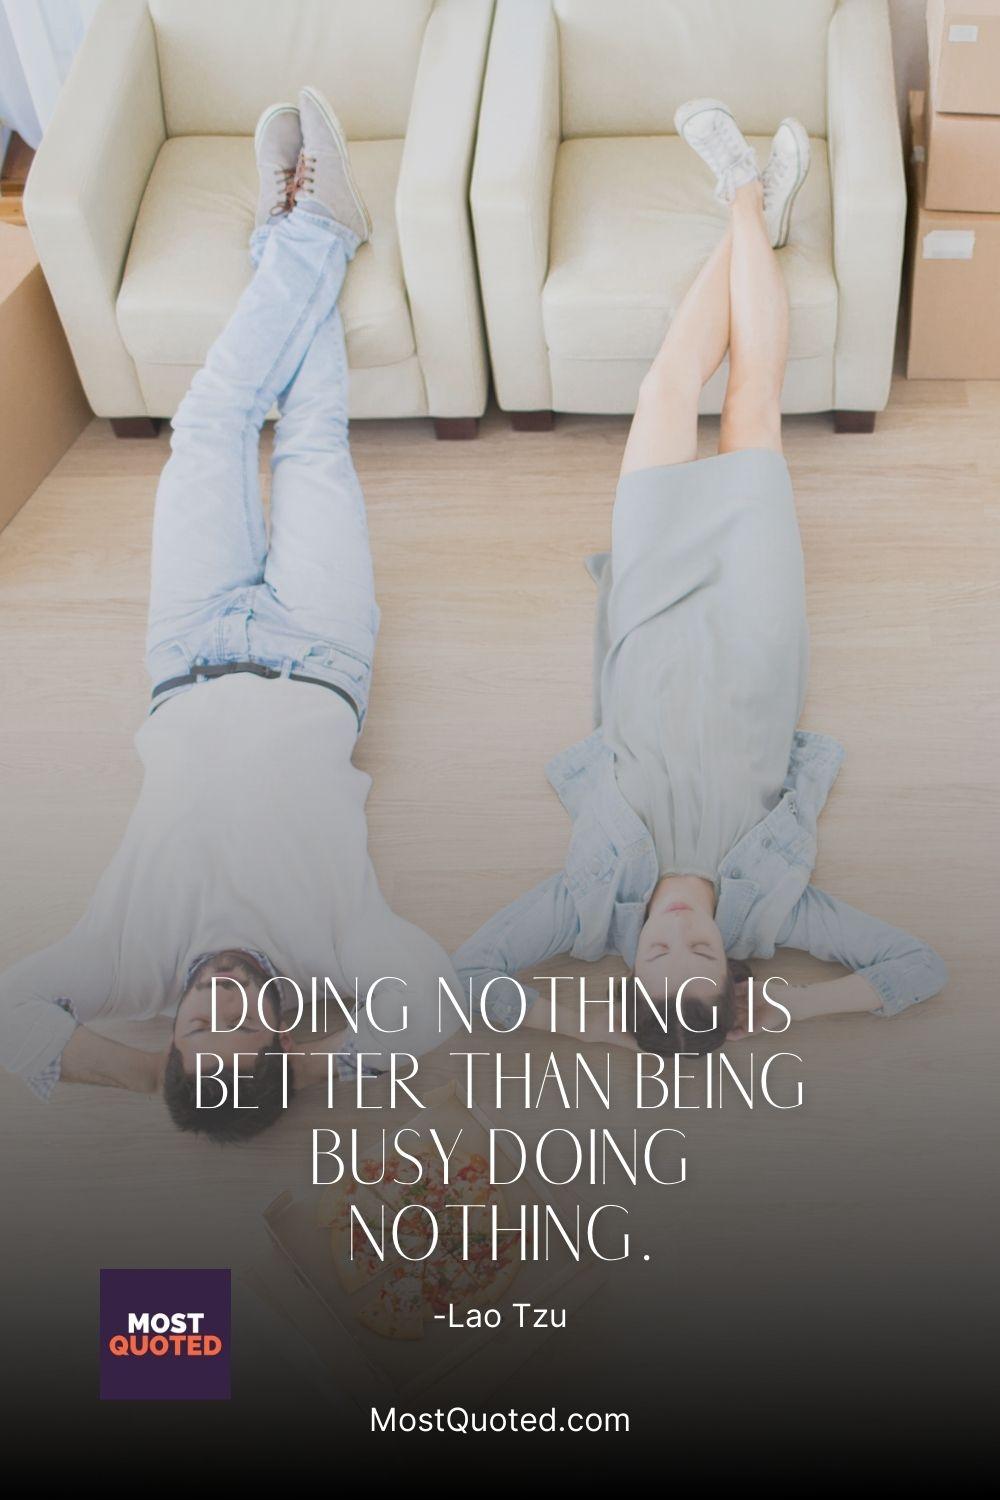 Doing nothing is better than being busy doing nothing. - Lao Tzu